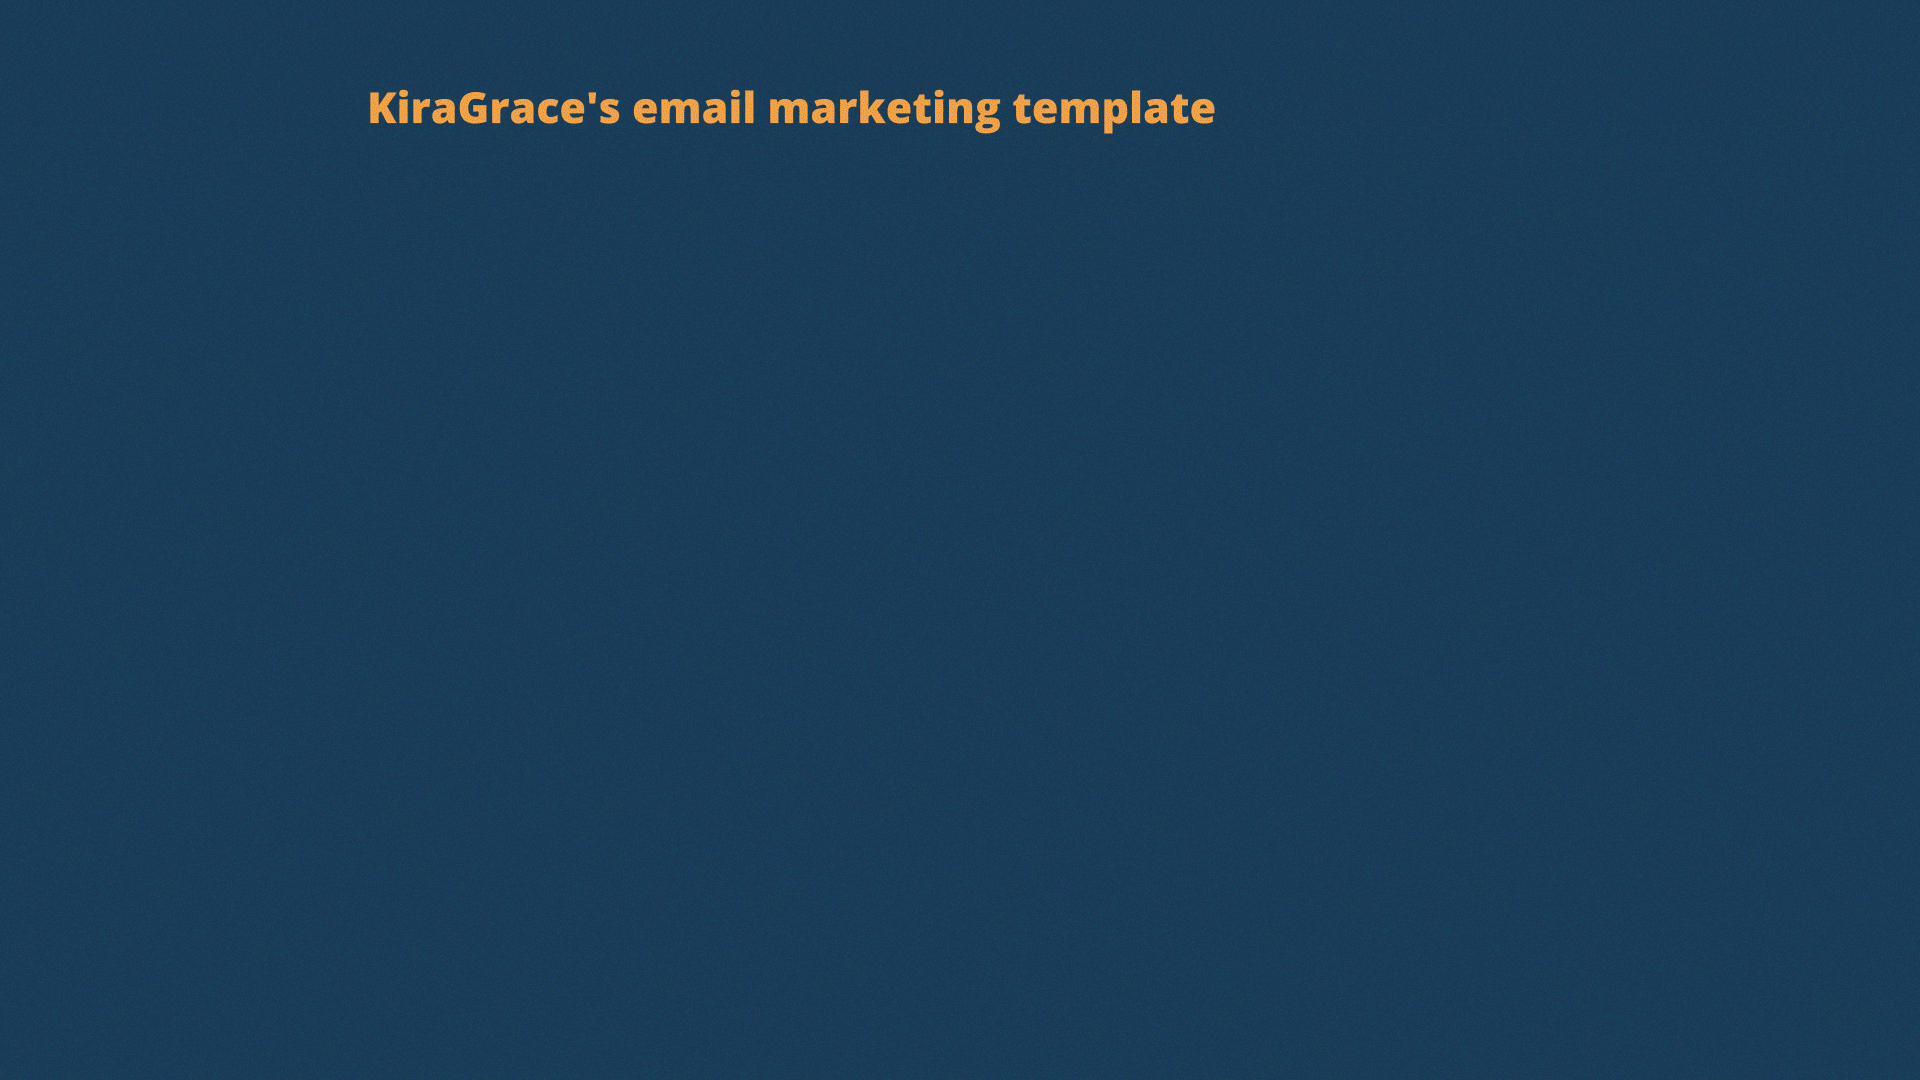 KiraGrace's email marketing template before and after hiring a professional branding agency.